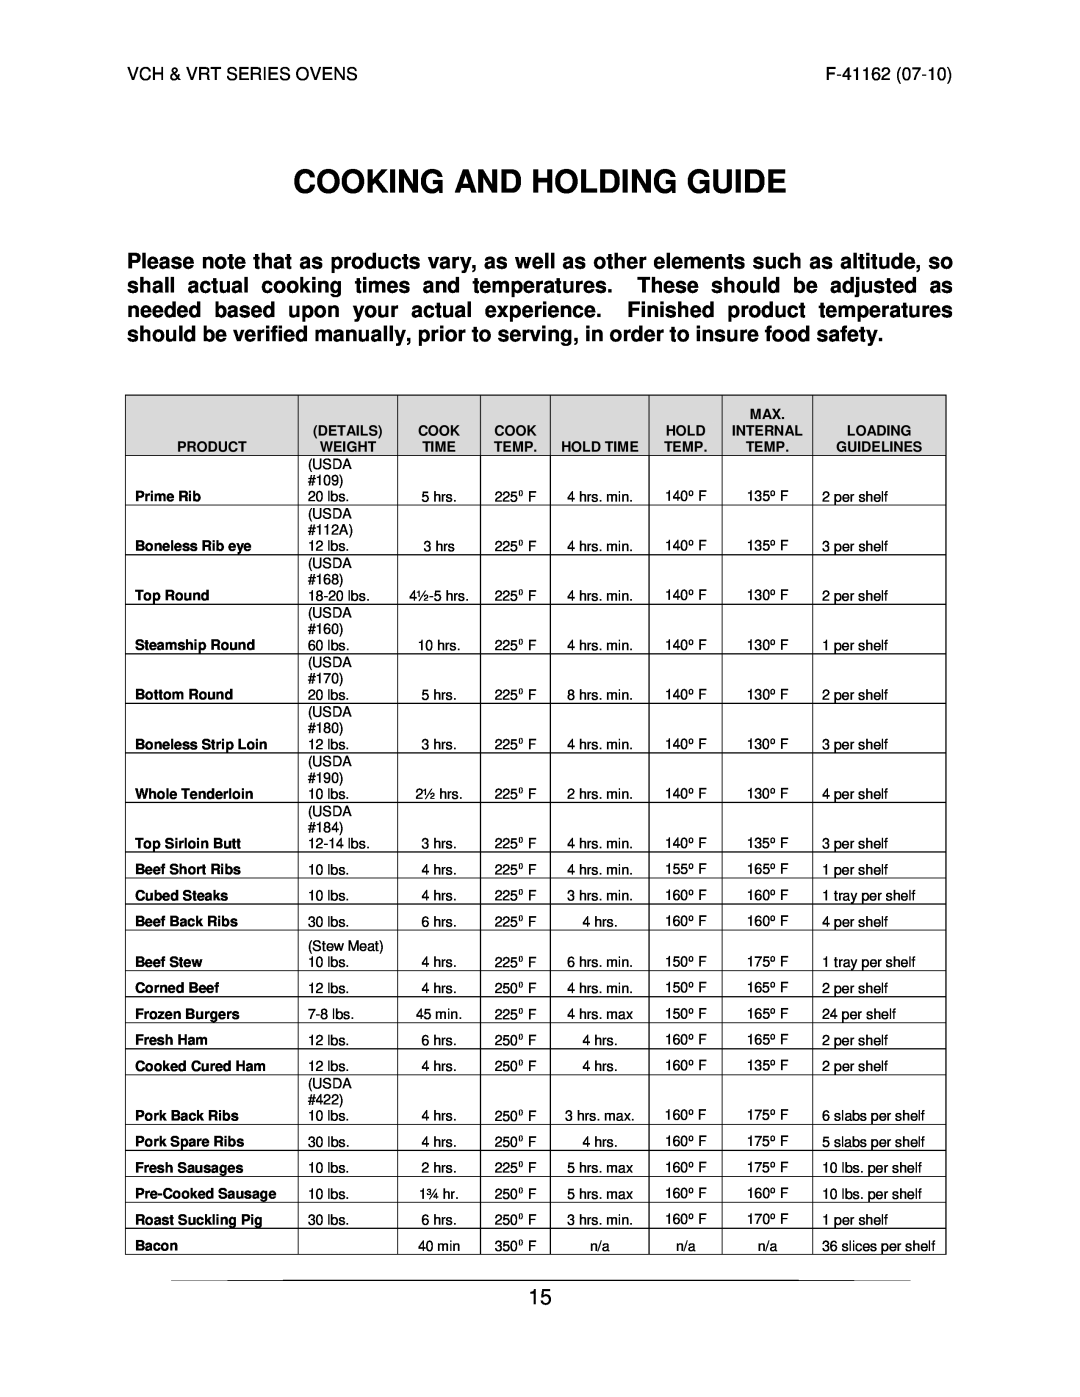 Vulcan-Hart VRT SERIES operation manual Cooking And Holding Guide 